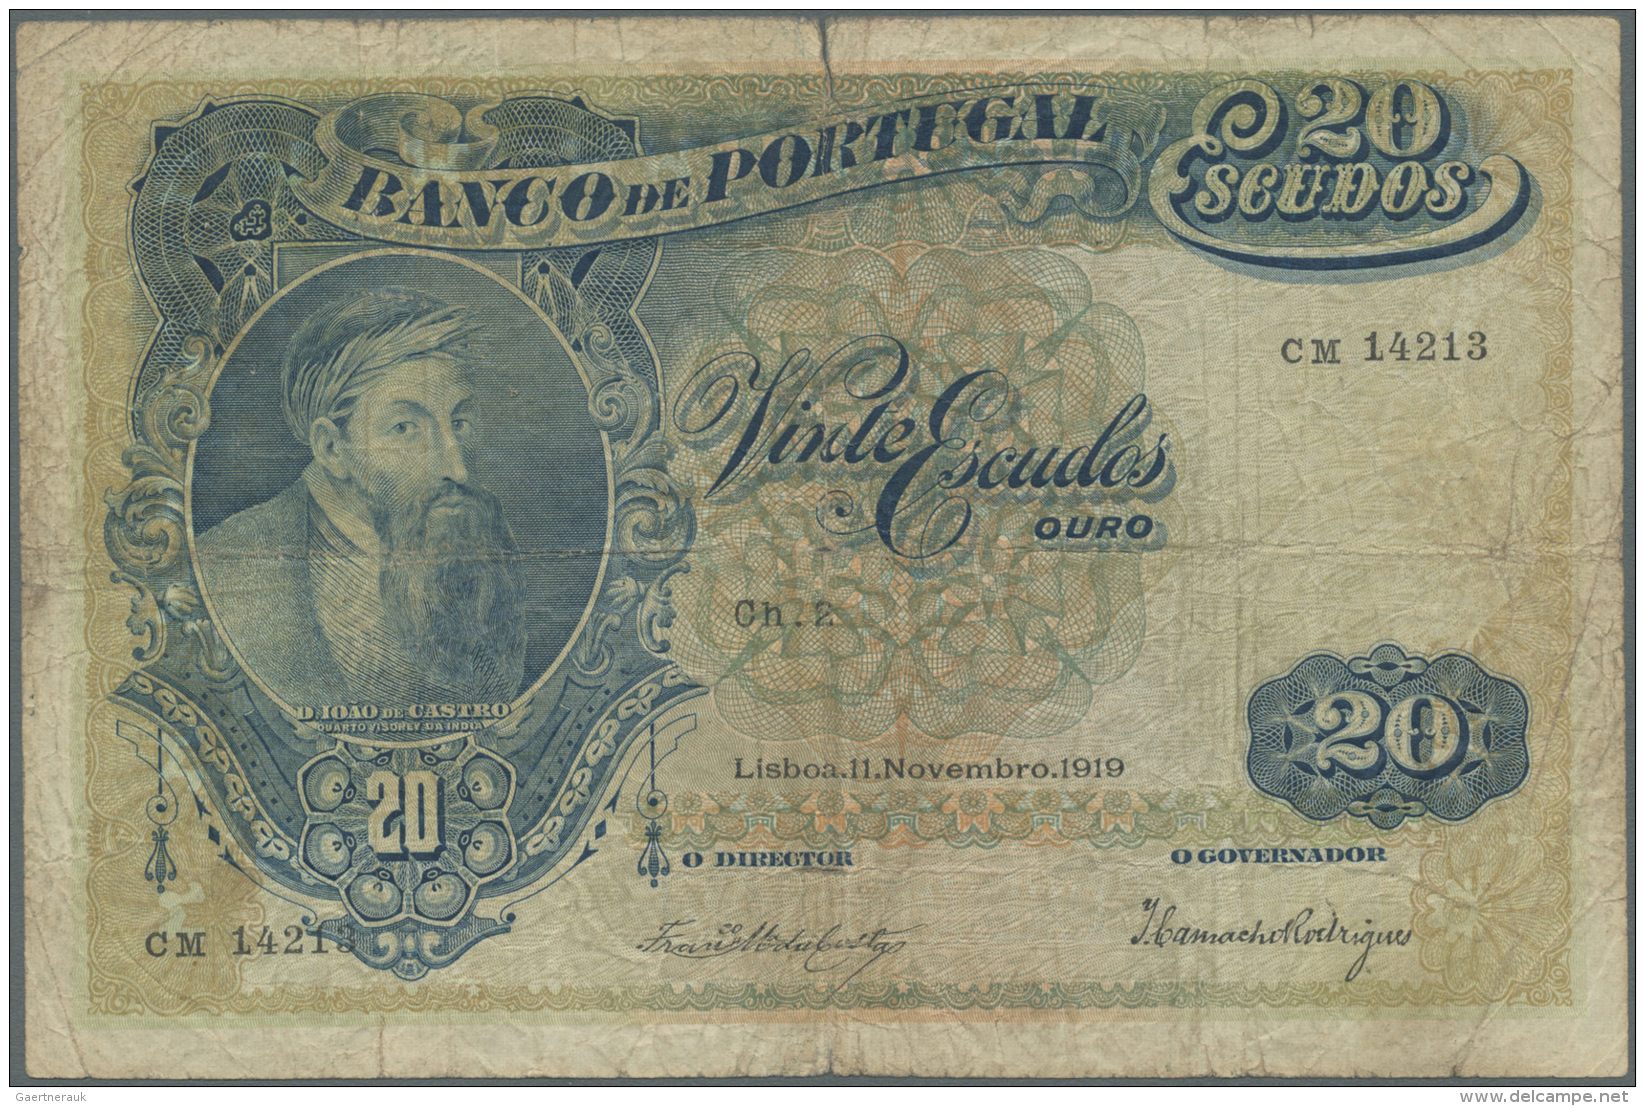 Portugal: 20 Escudos 1919 P. 118, Stained Paper, Several Folds, Strong Center Fold, Center Hole, One Border Tear 5mm At - Portugal